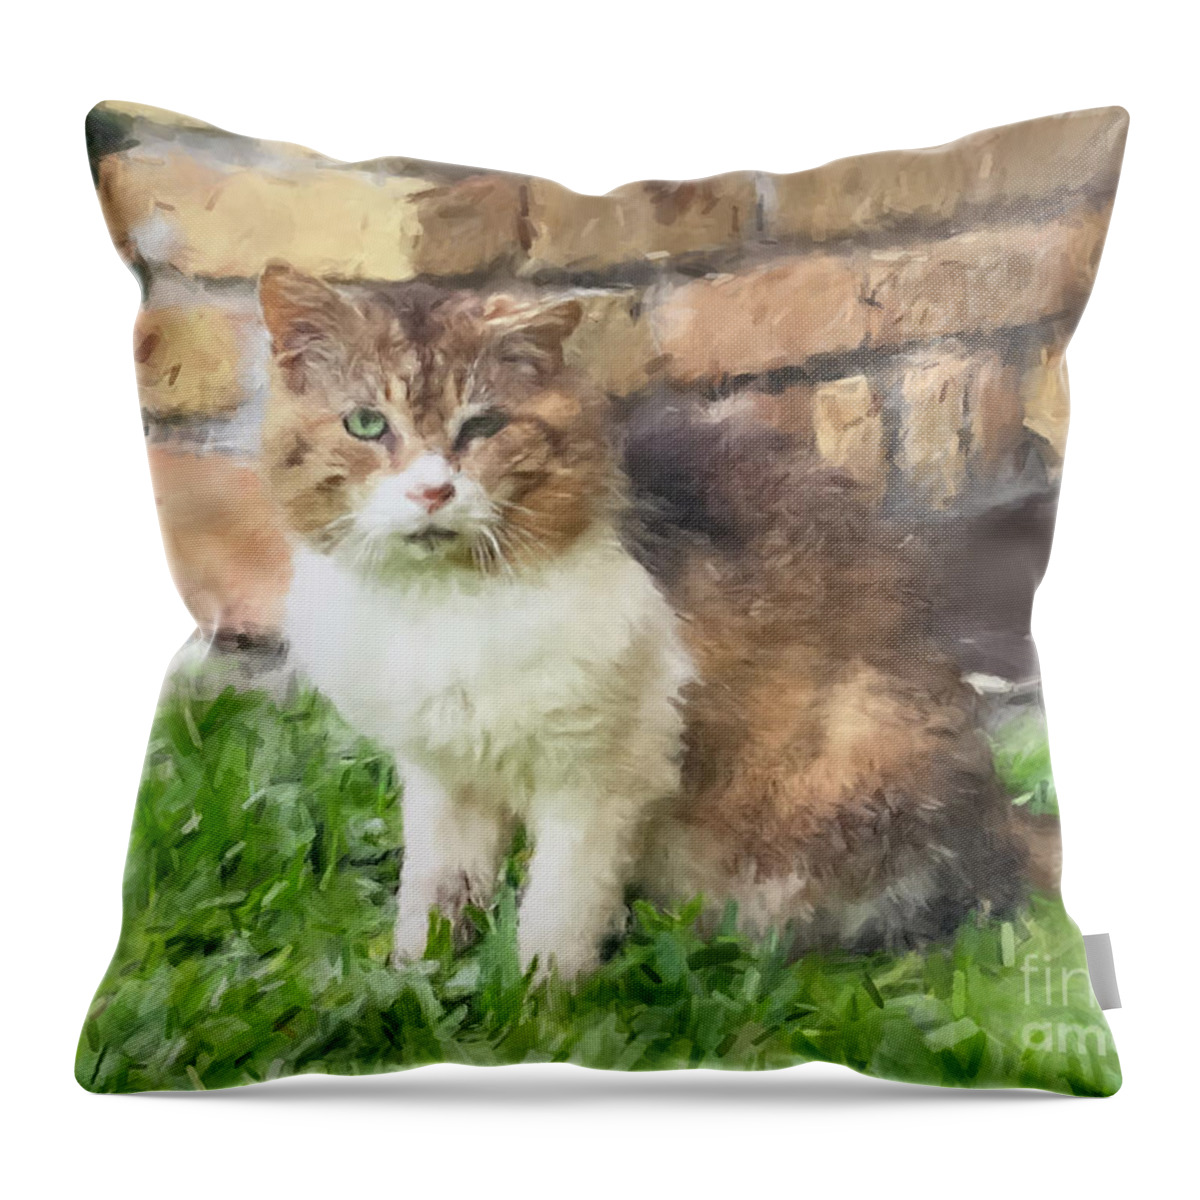 Wildlife Throw Pillow featuring the painting The Old Tom by Gary Arnold